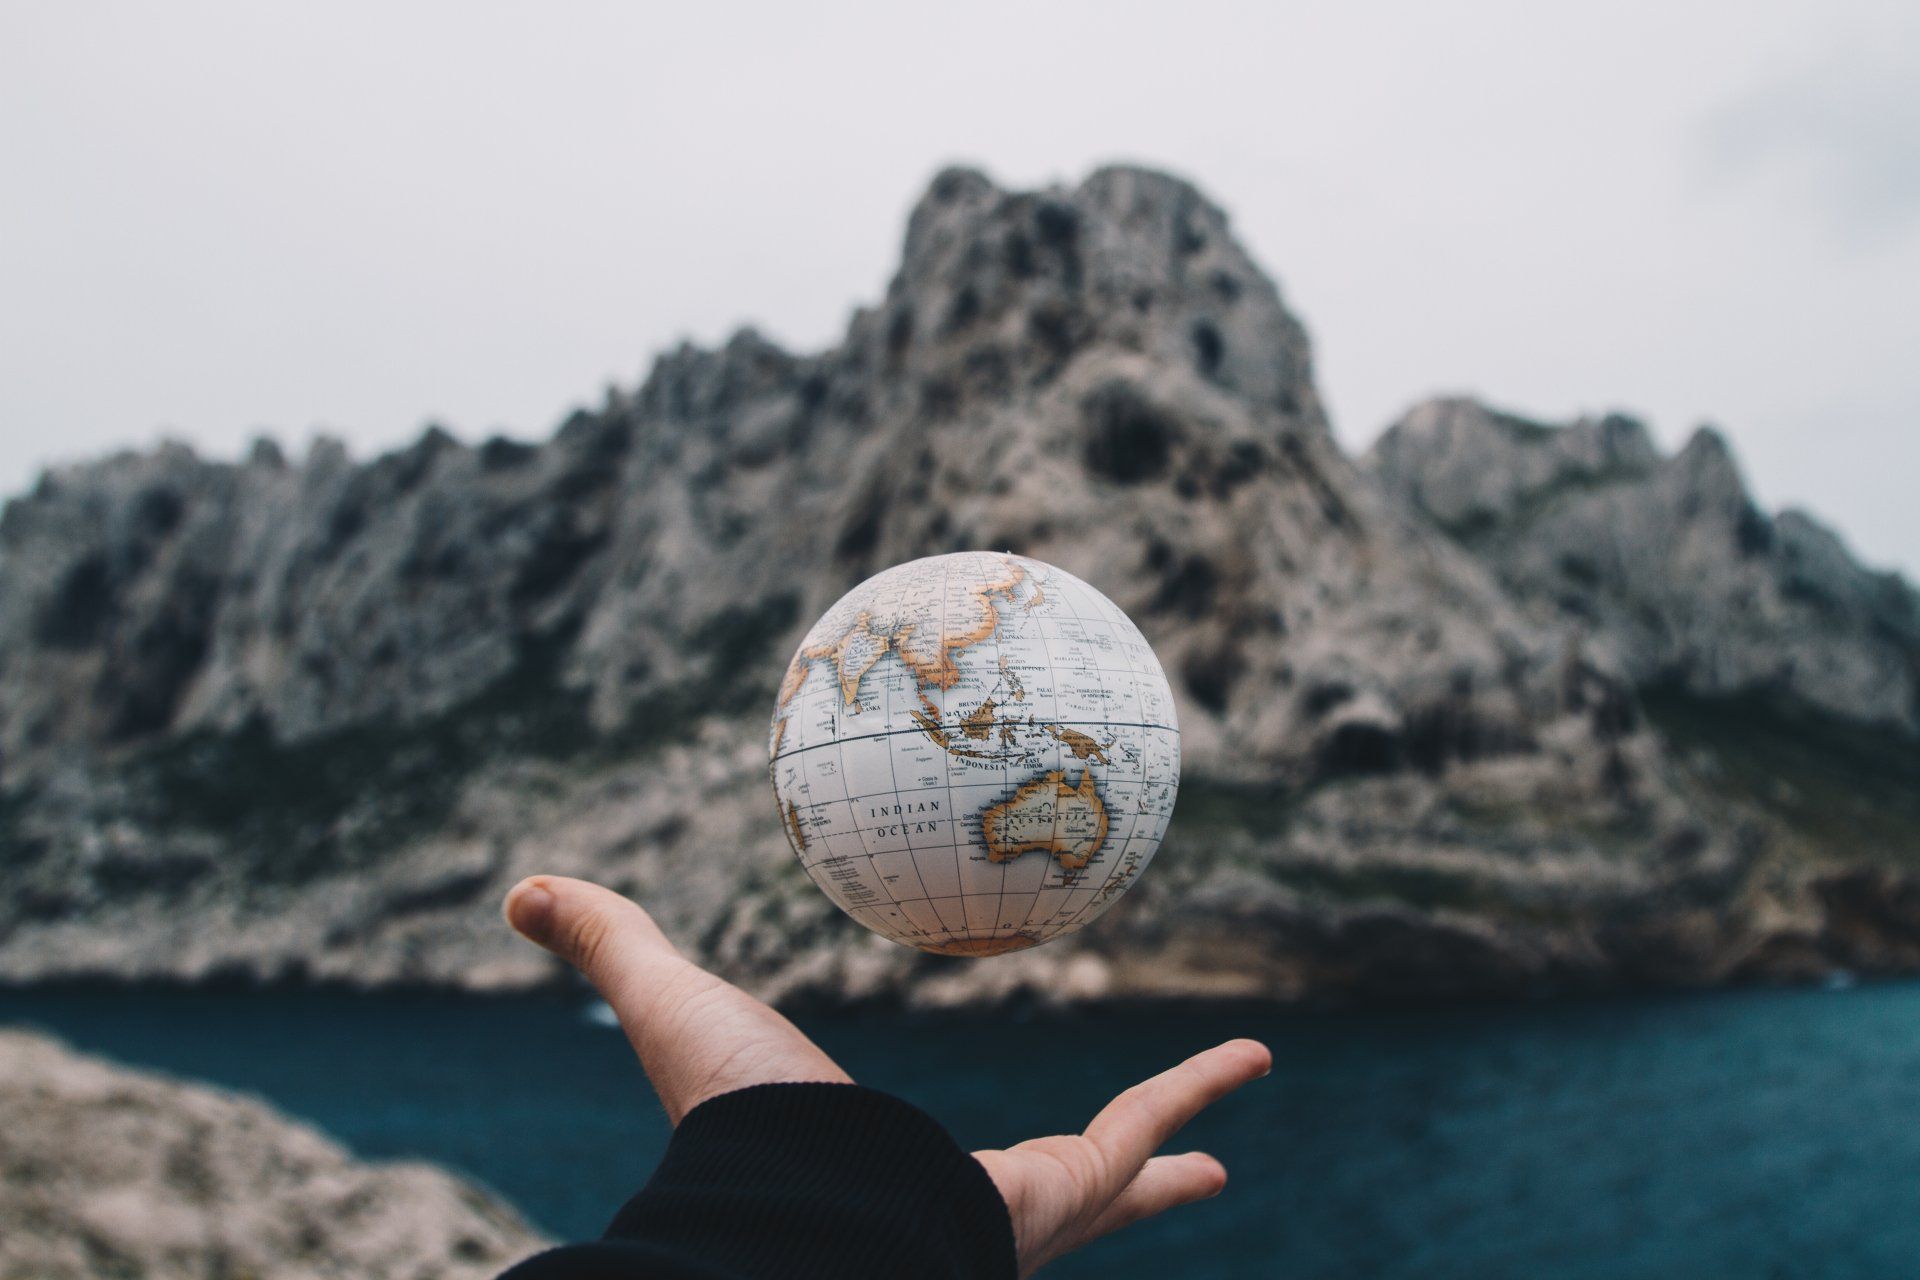 A picture of a globe underneath a hand